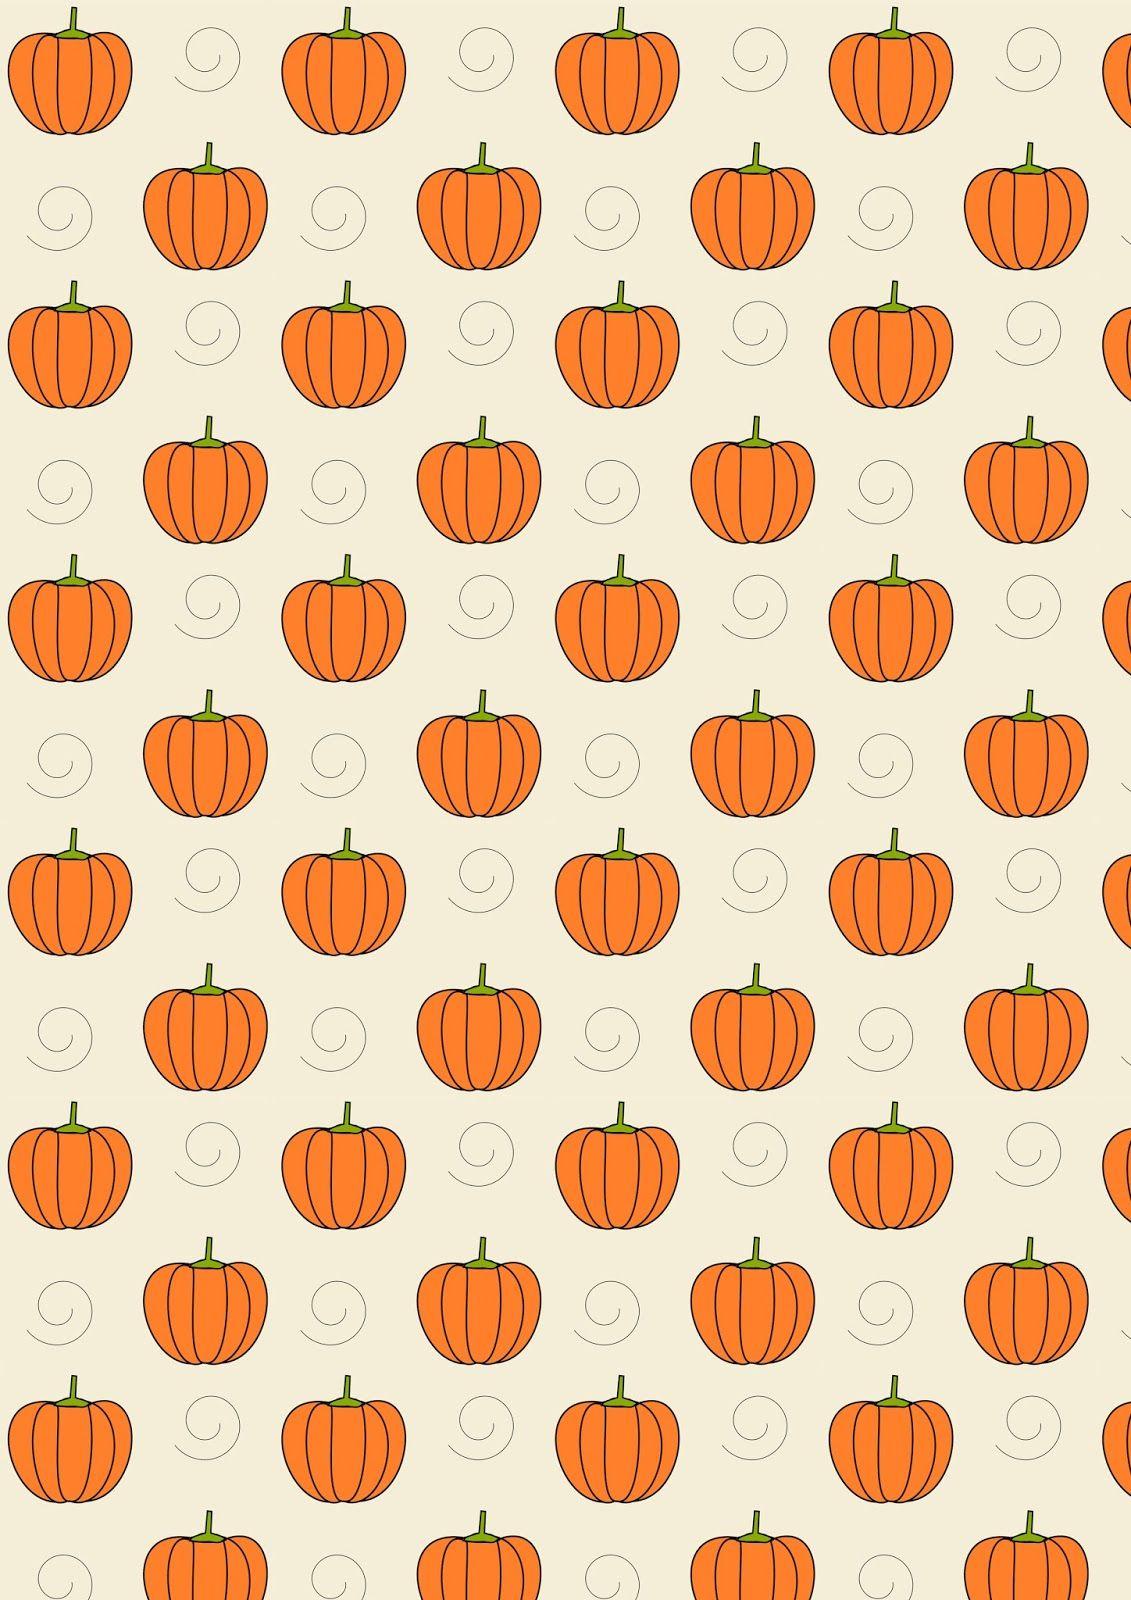 FREE printable pumpkin pattern paper - ^^. Just draw faces